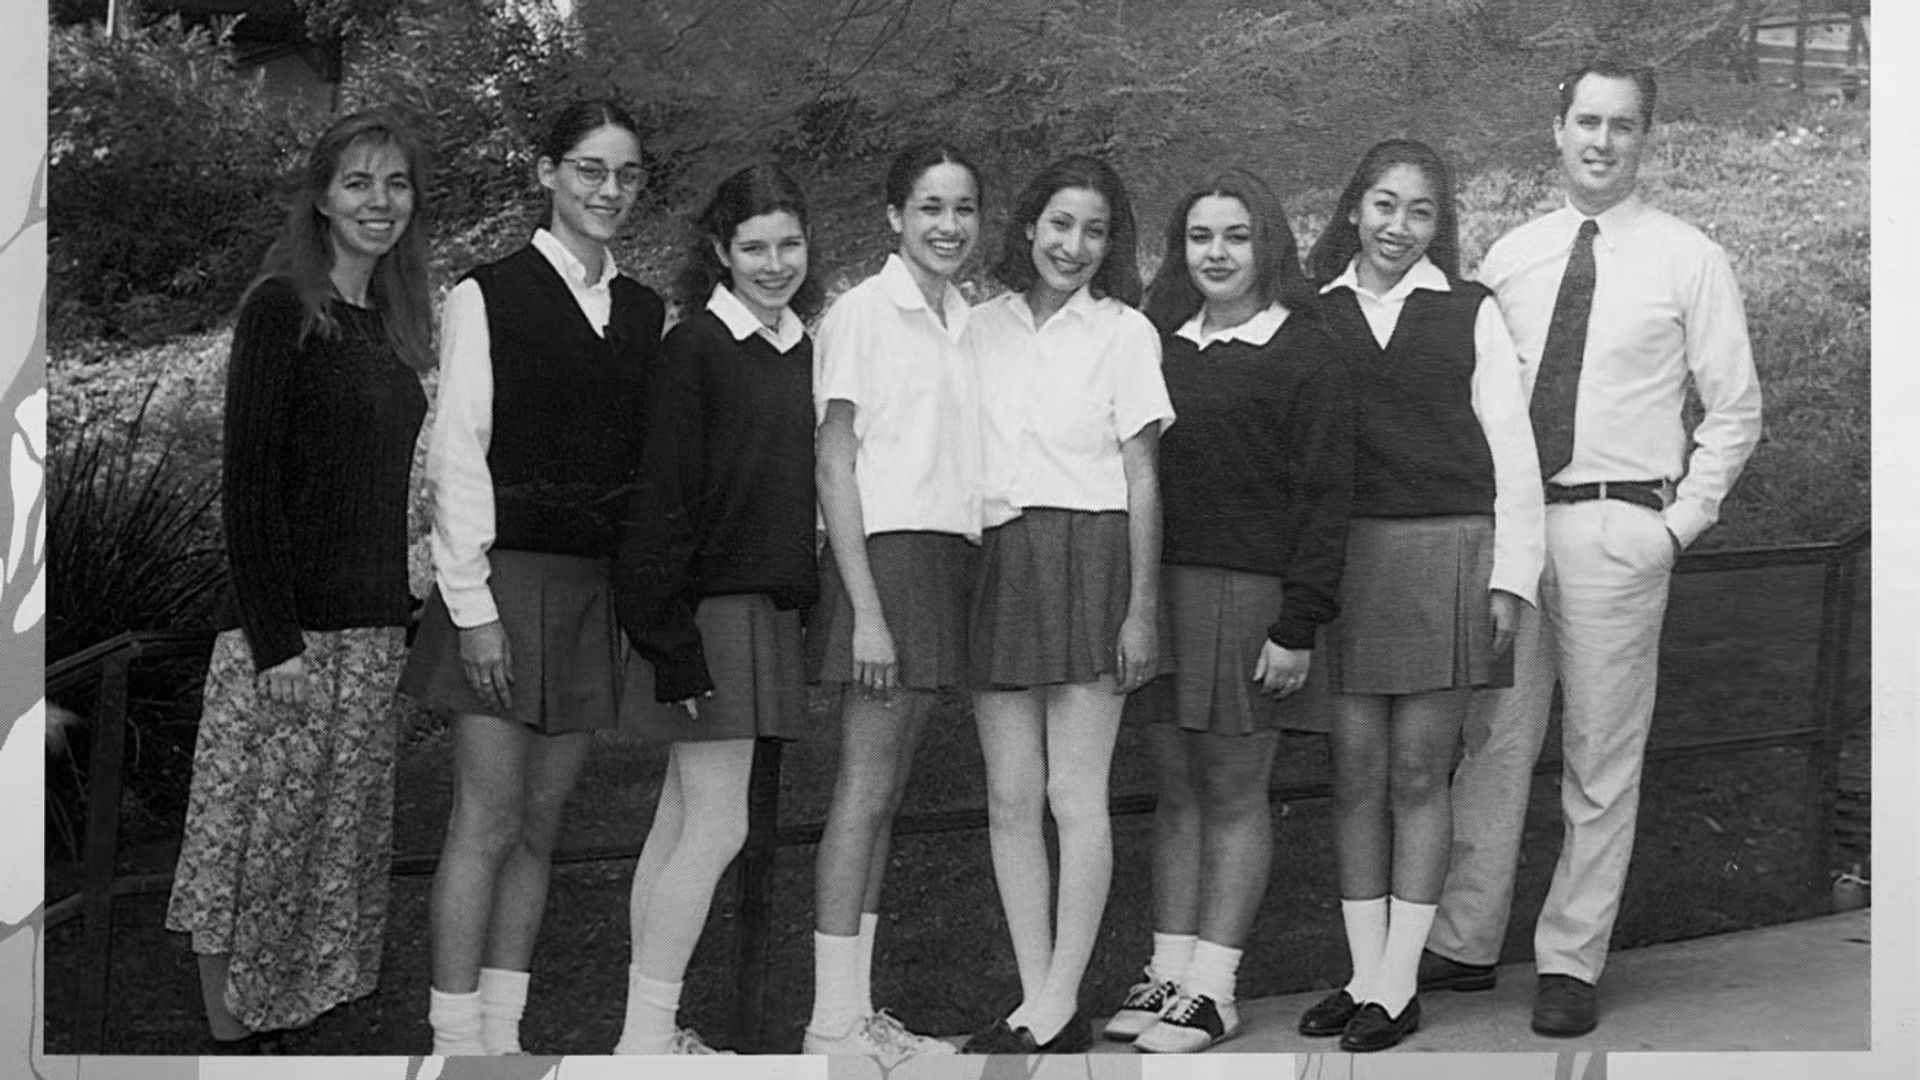 Meghan Markle yearbook photo, she stands in the middle in a white shirt and skirt